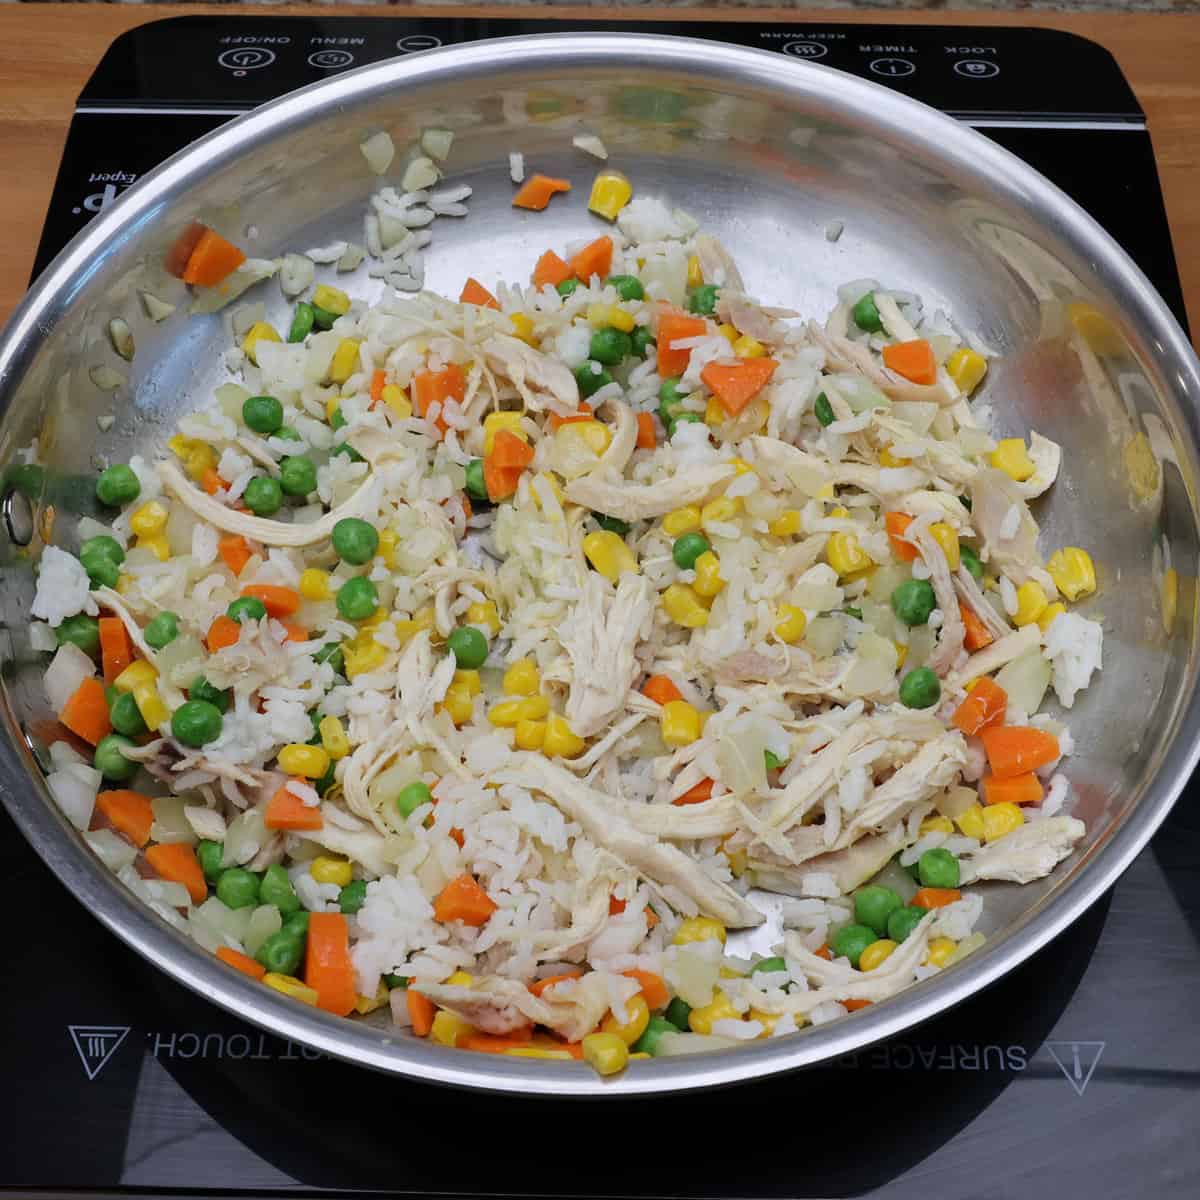 Fried rice cooking in a skillet.